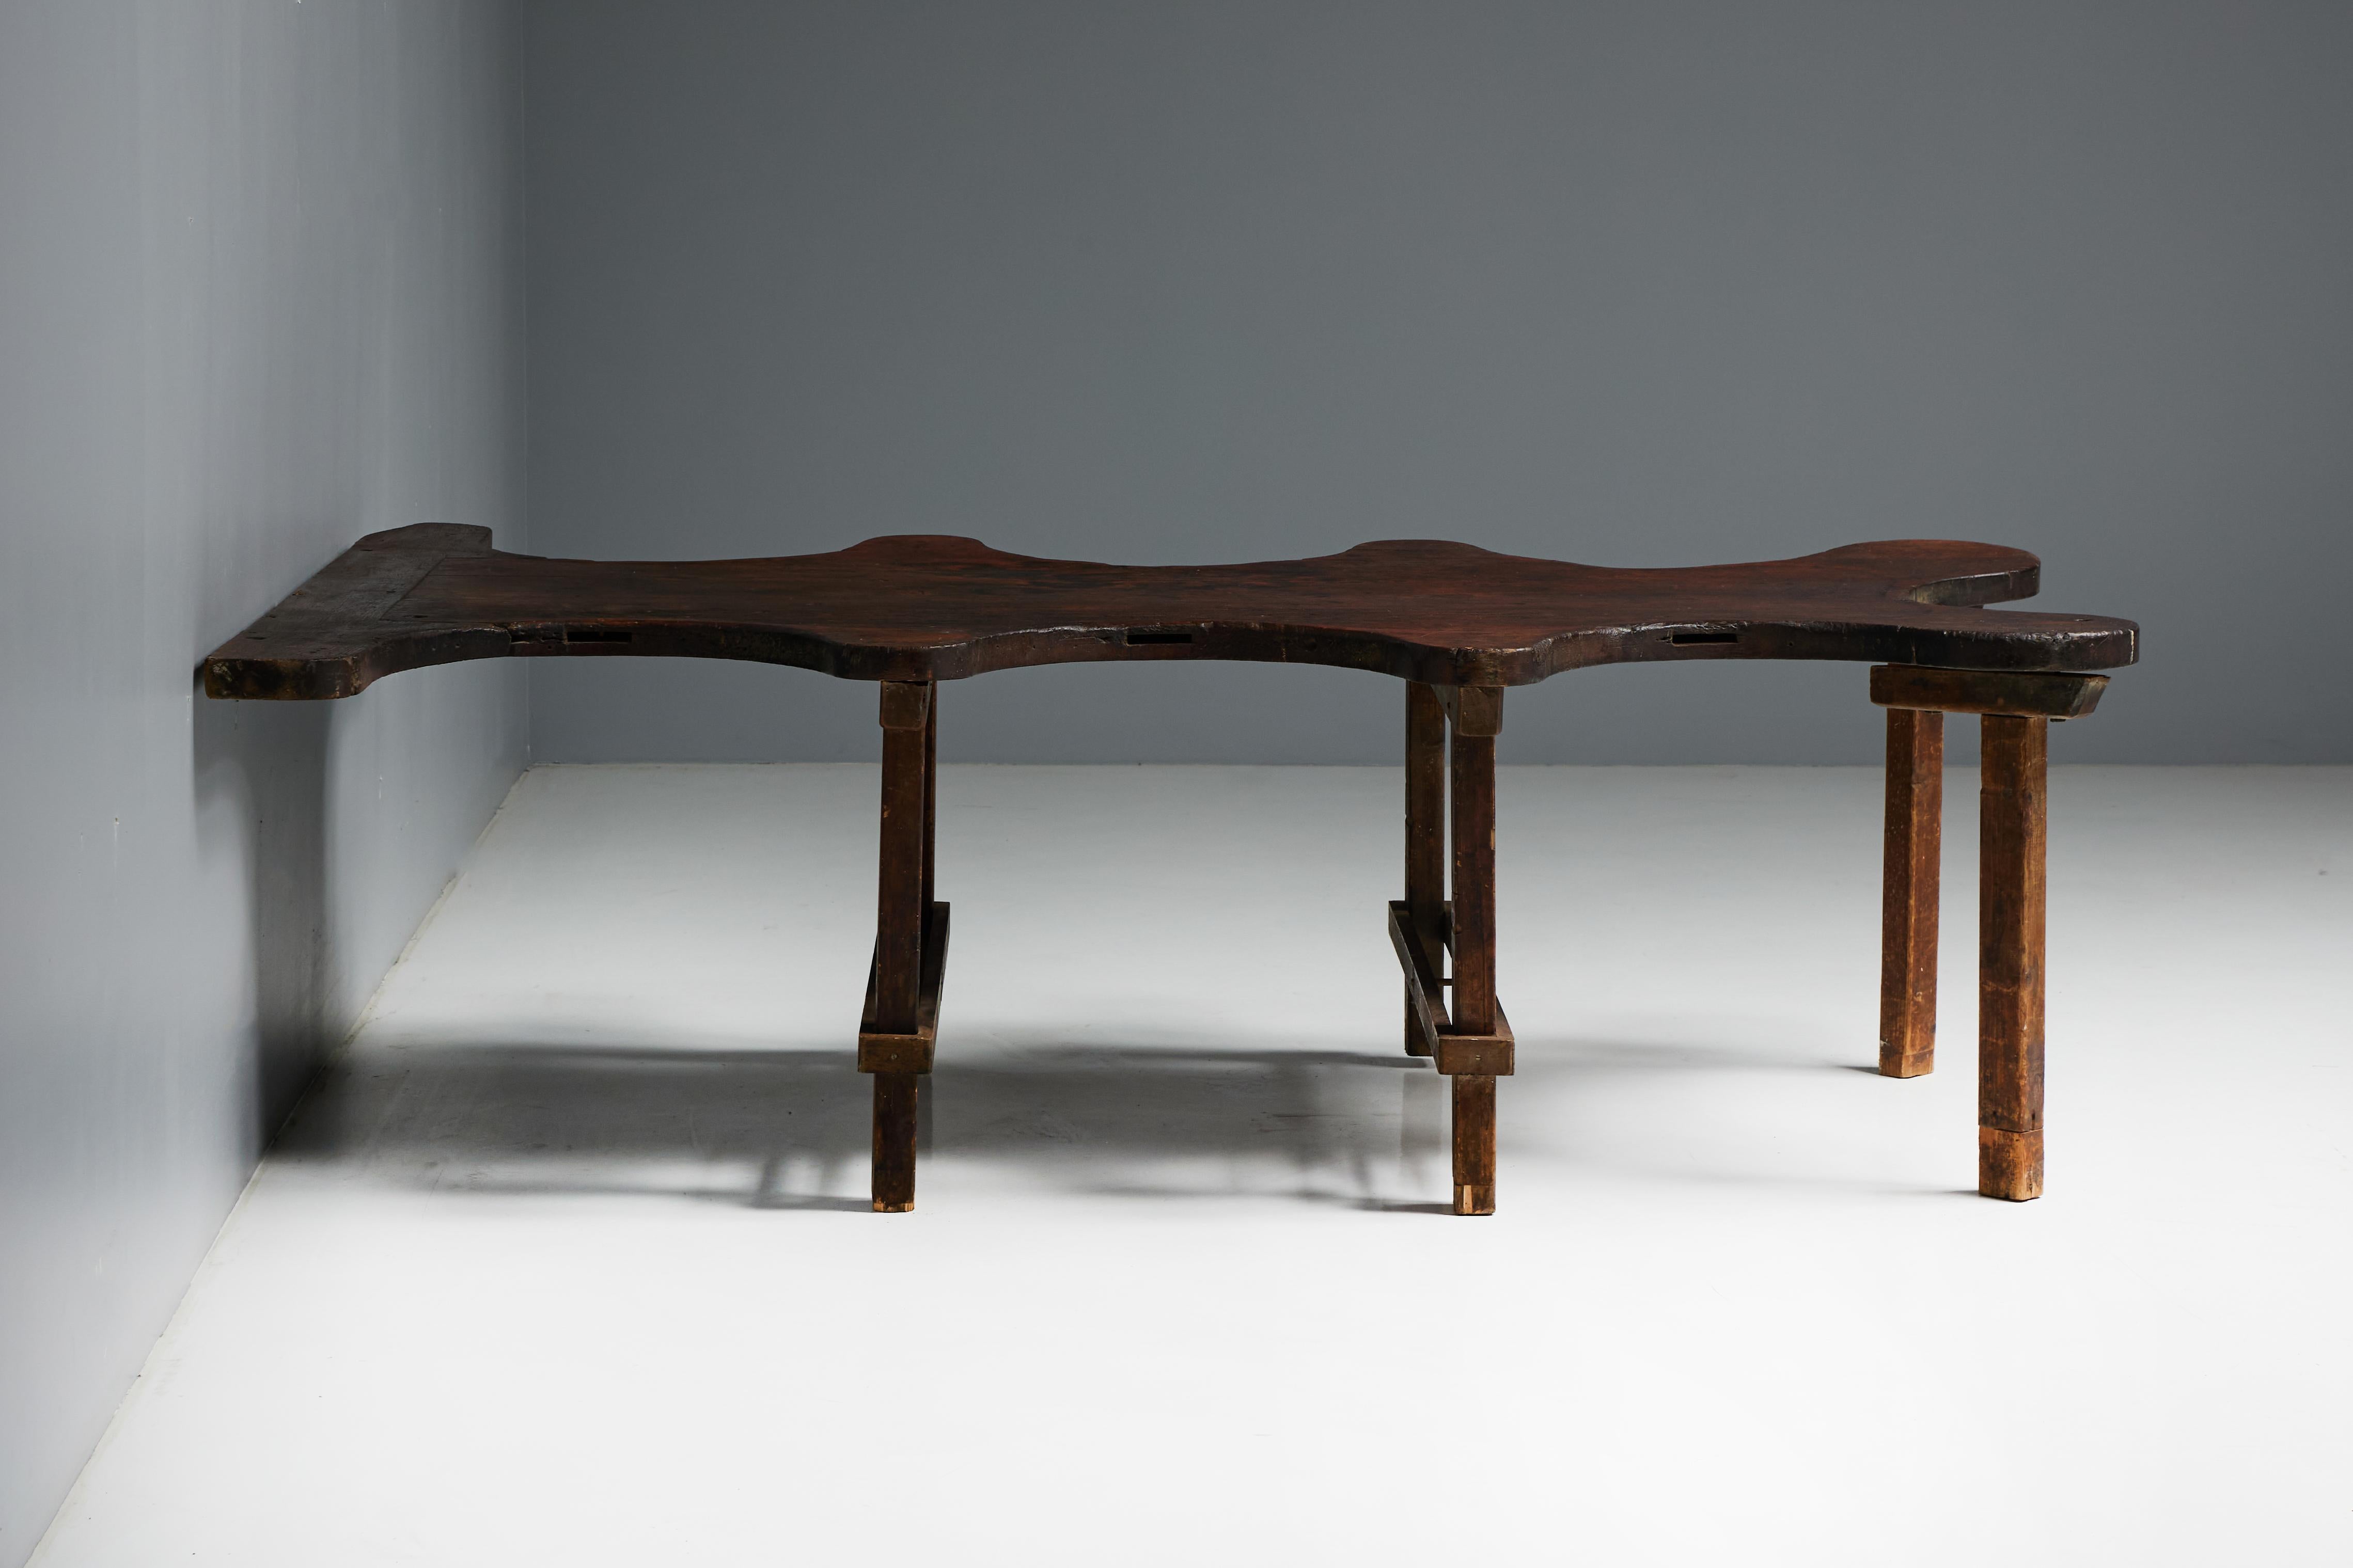 Rustic Free Form Organic Table, France, Late 19th Century For Sale 14